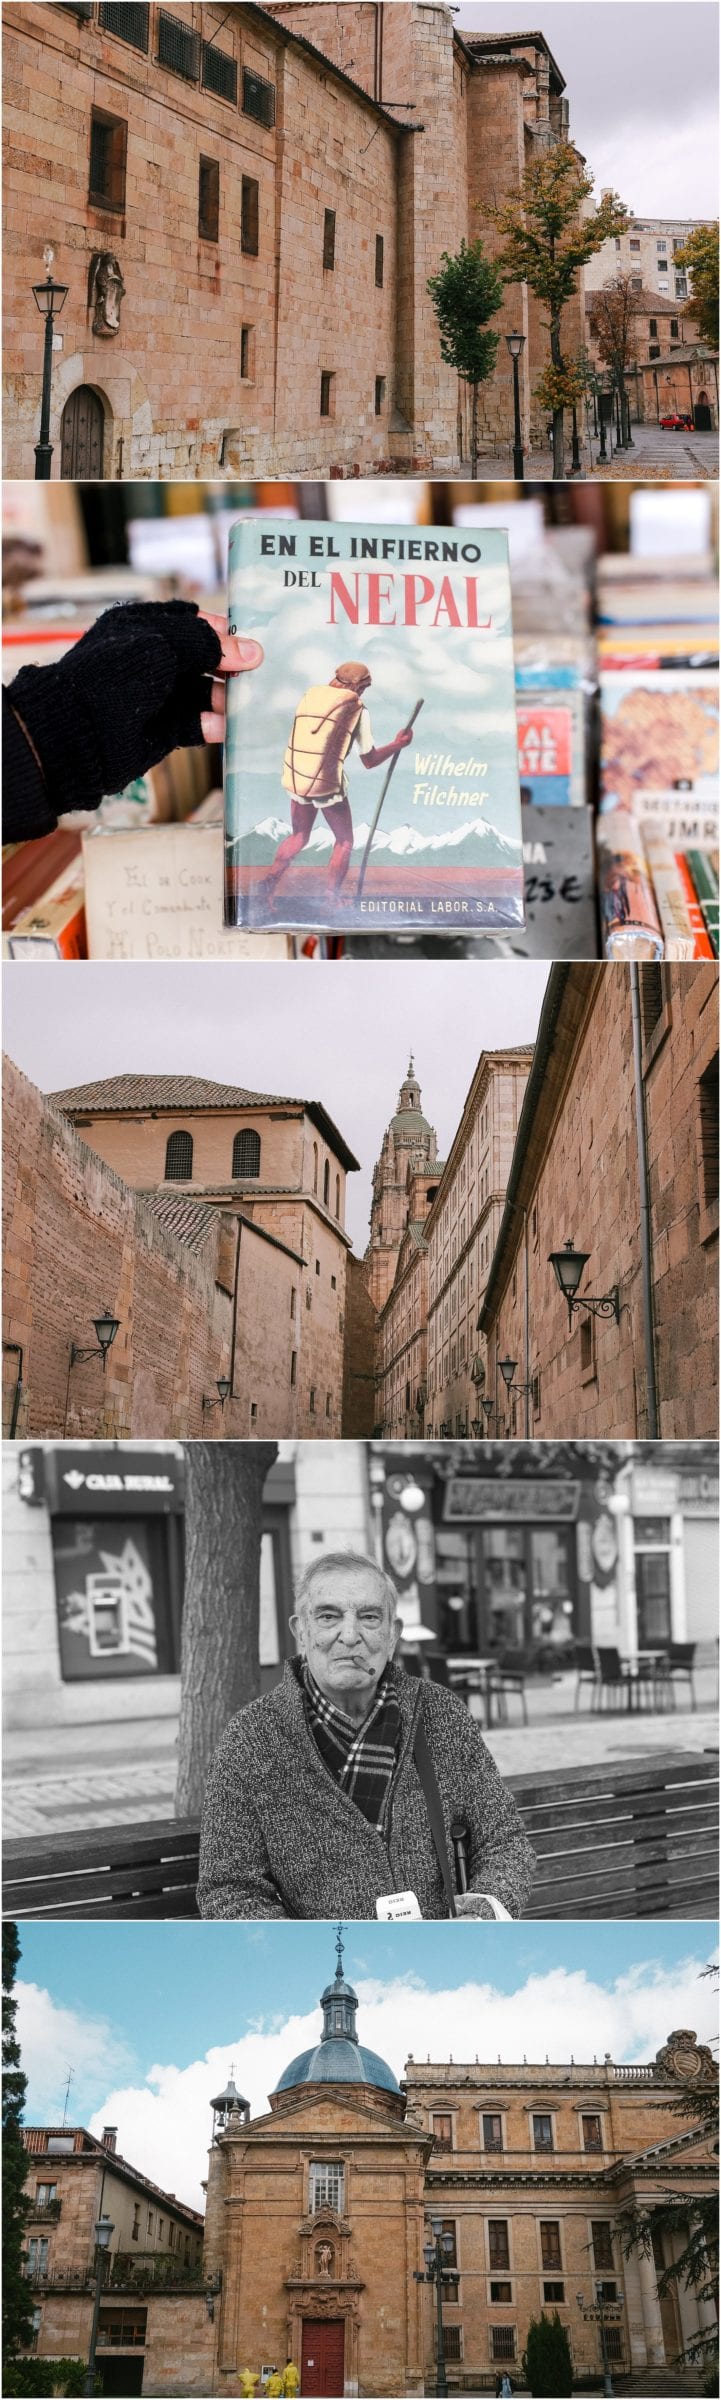 5 Most Underrated Small Cities in Spain You Must Visit! Salamanca, Caceres, Cordoba, Granada, Aranjez - Photographer / blogger Helena Woods